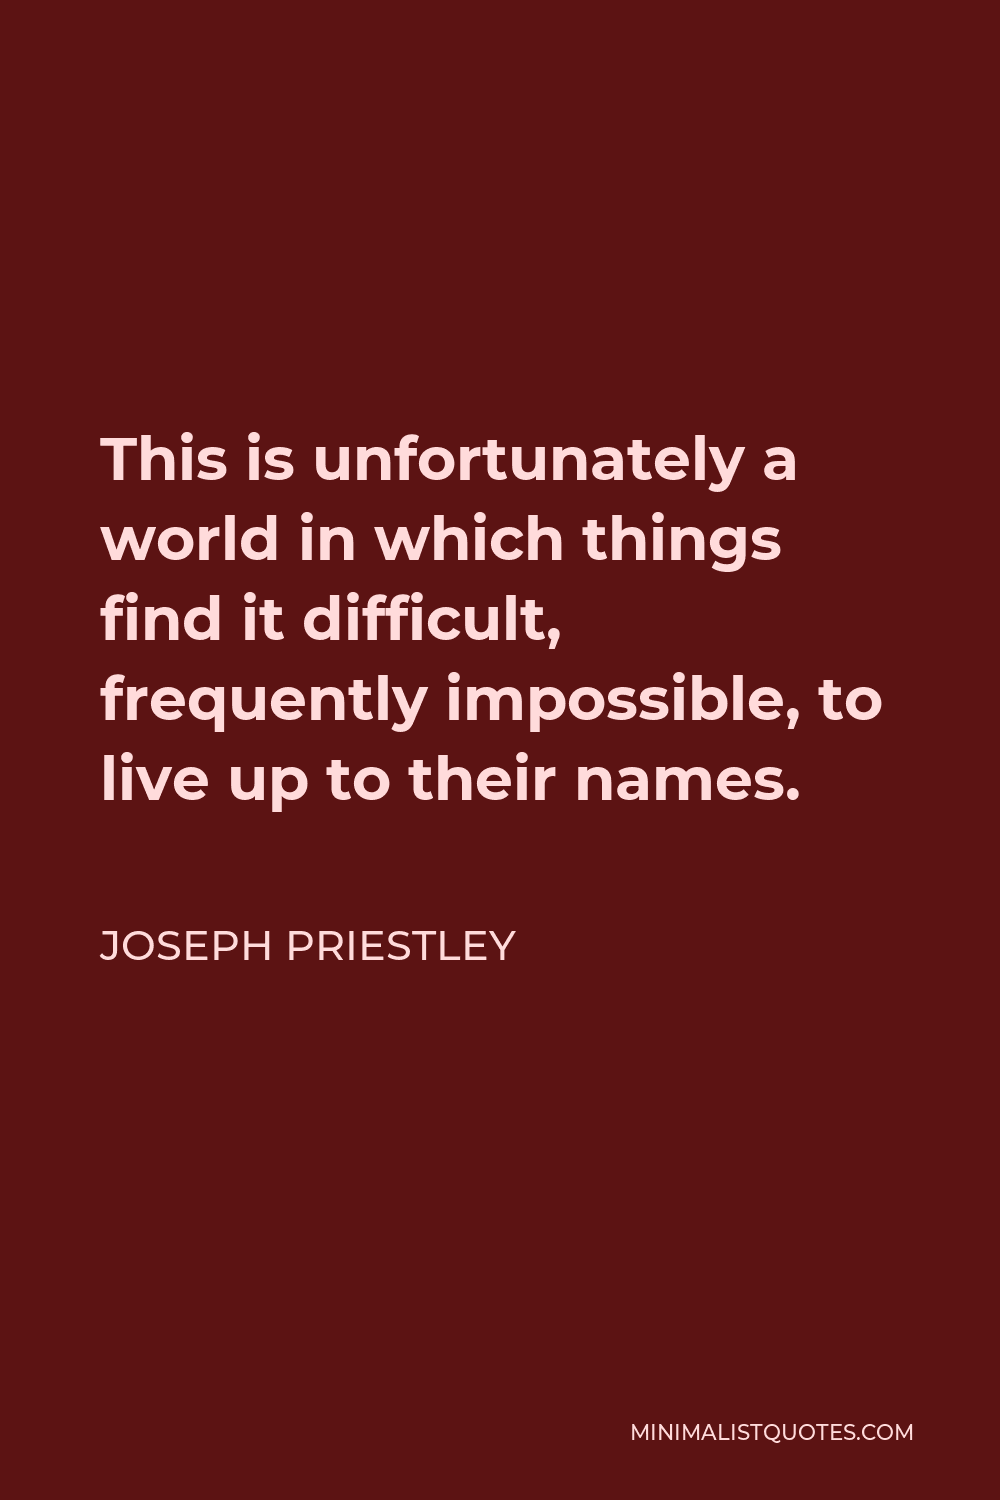 Joseph Priestley Quote - This is unfortunately a world in which things find it difficult, frequently impossible, to live up to their names.